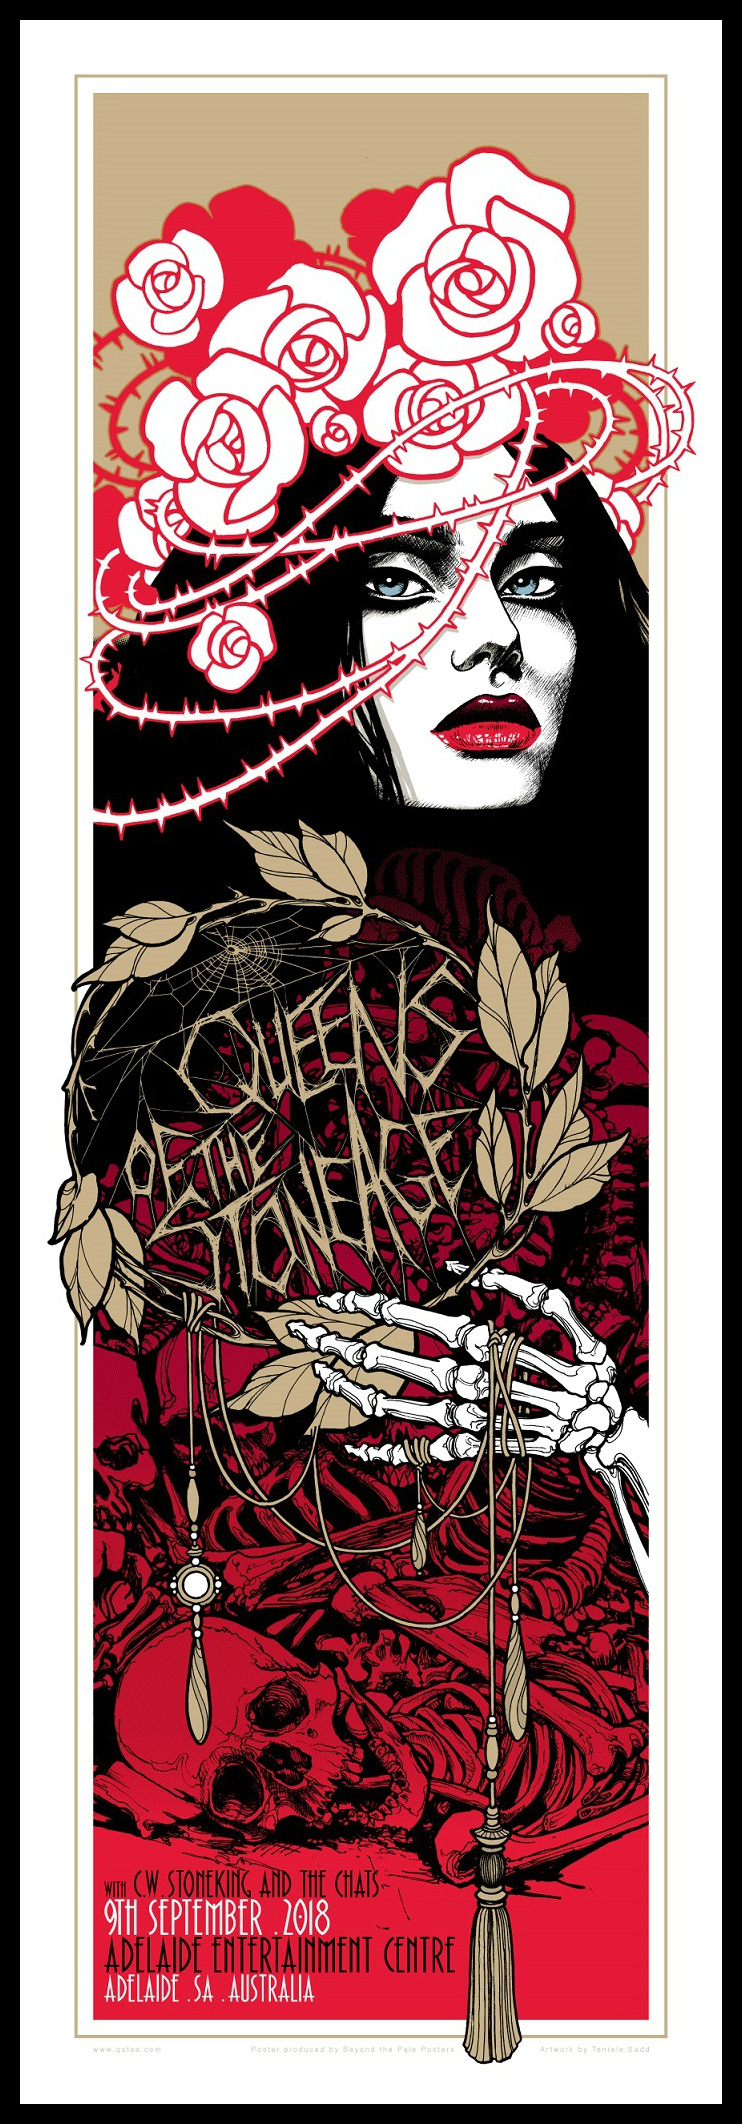 Queens of the Stone Age 411posters